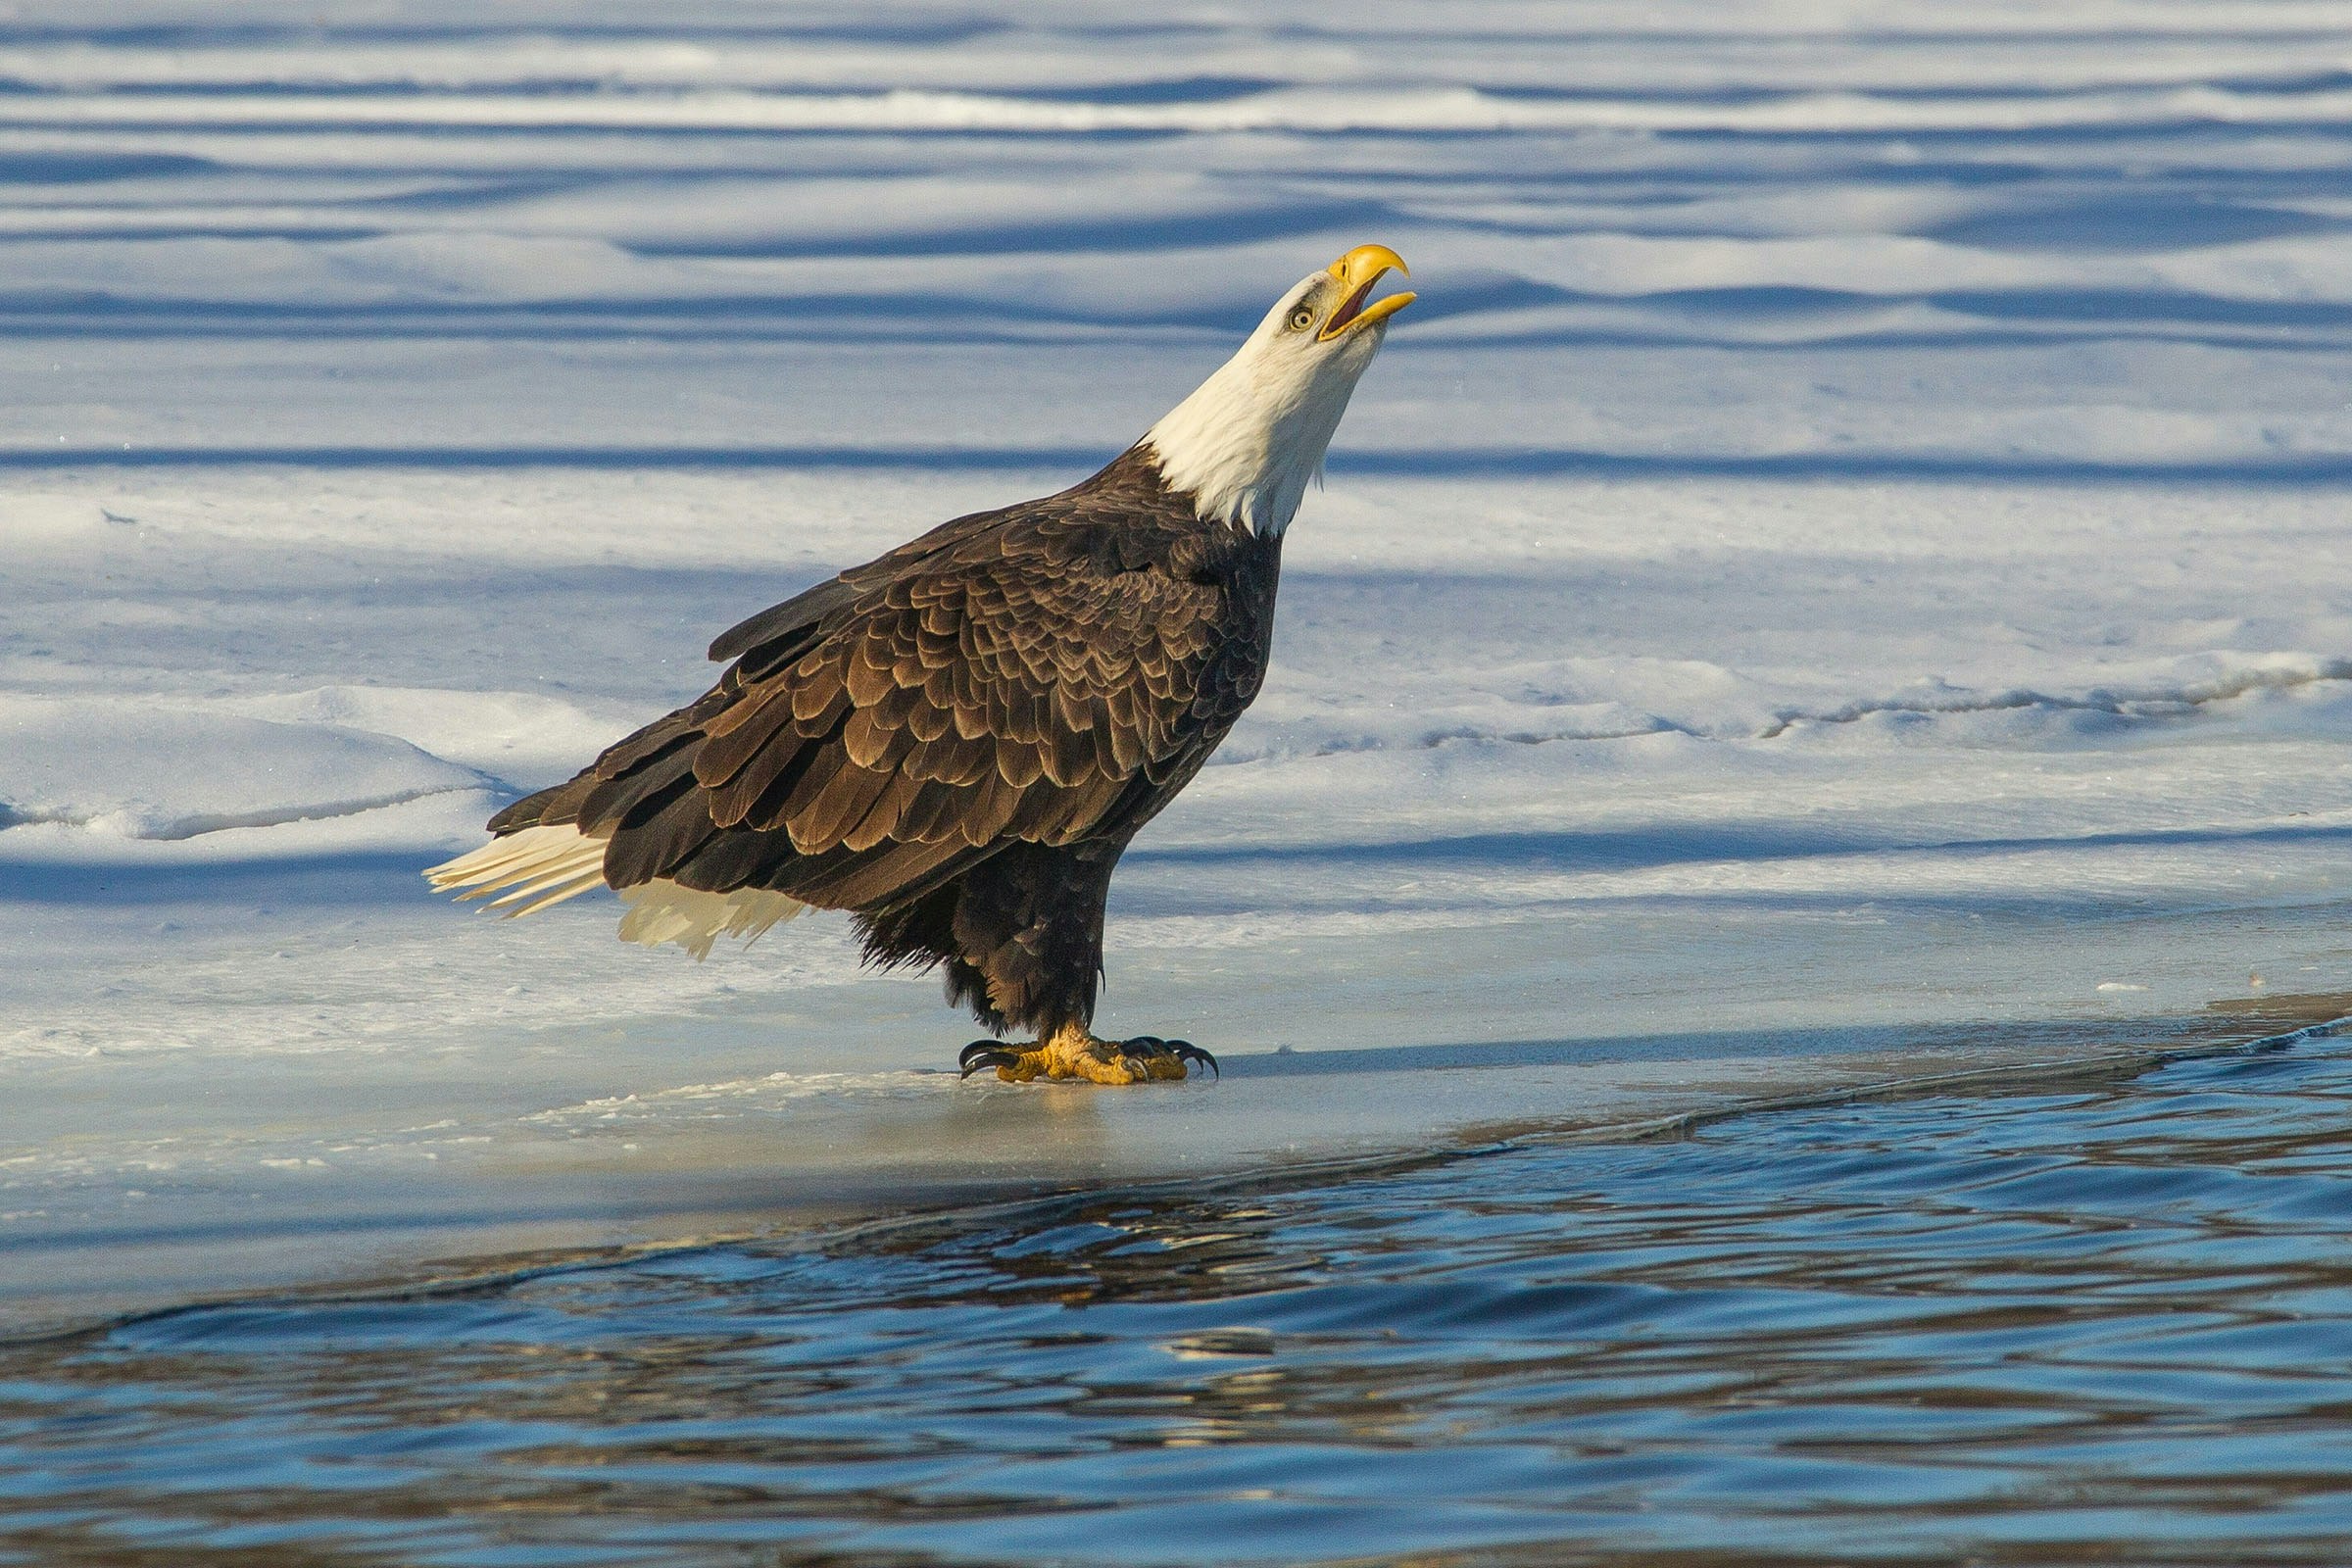 A single bald eagle sits on the ice next to an open body of water in the winter